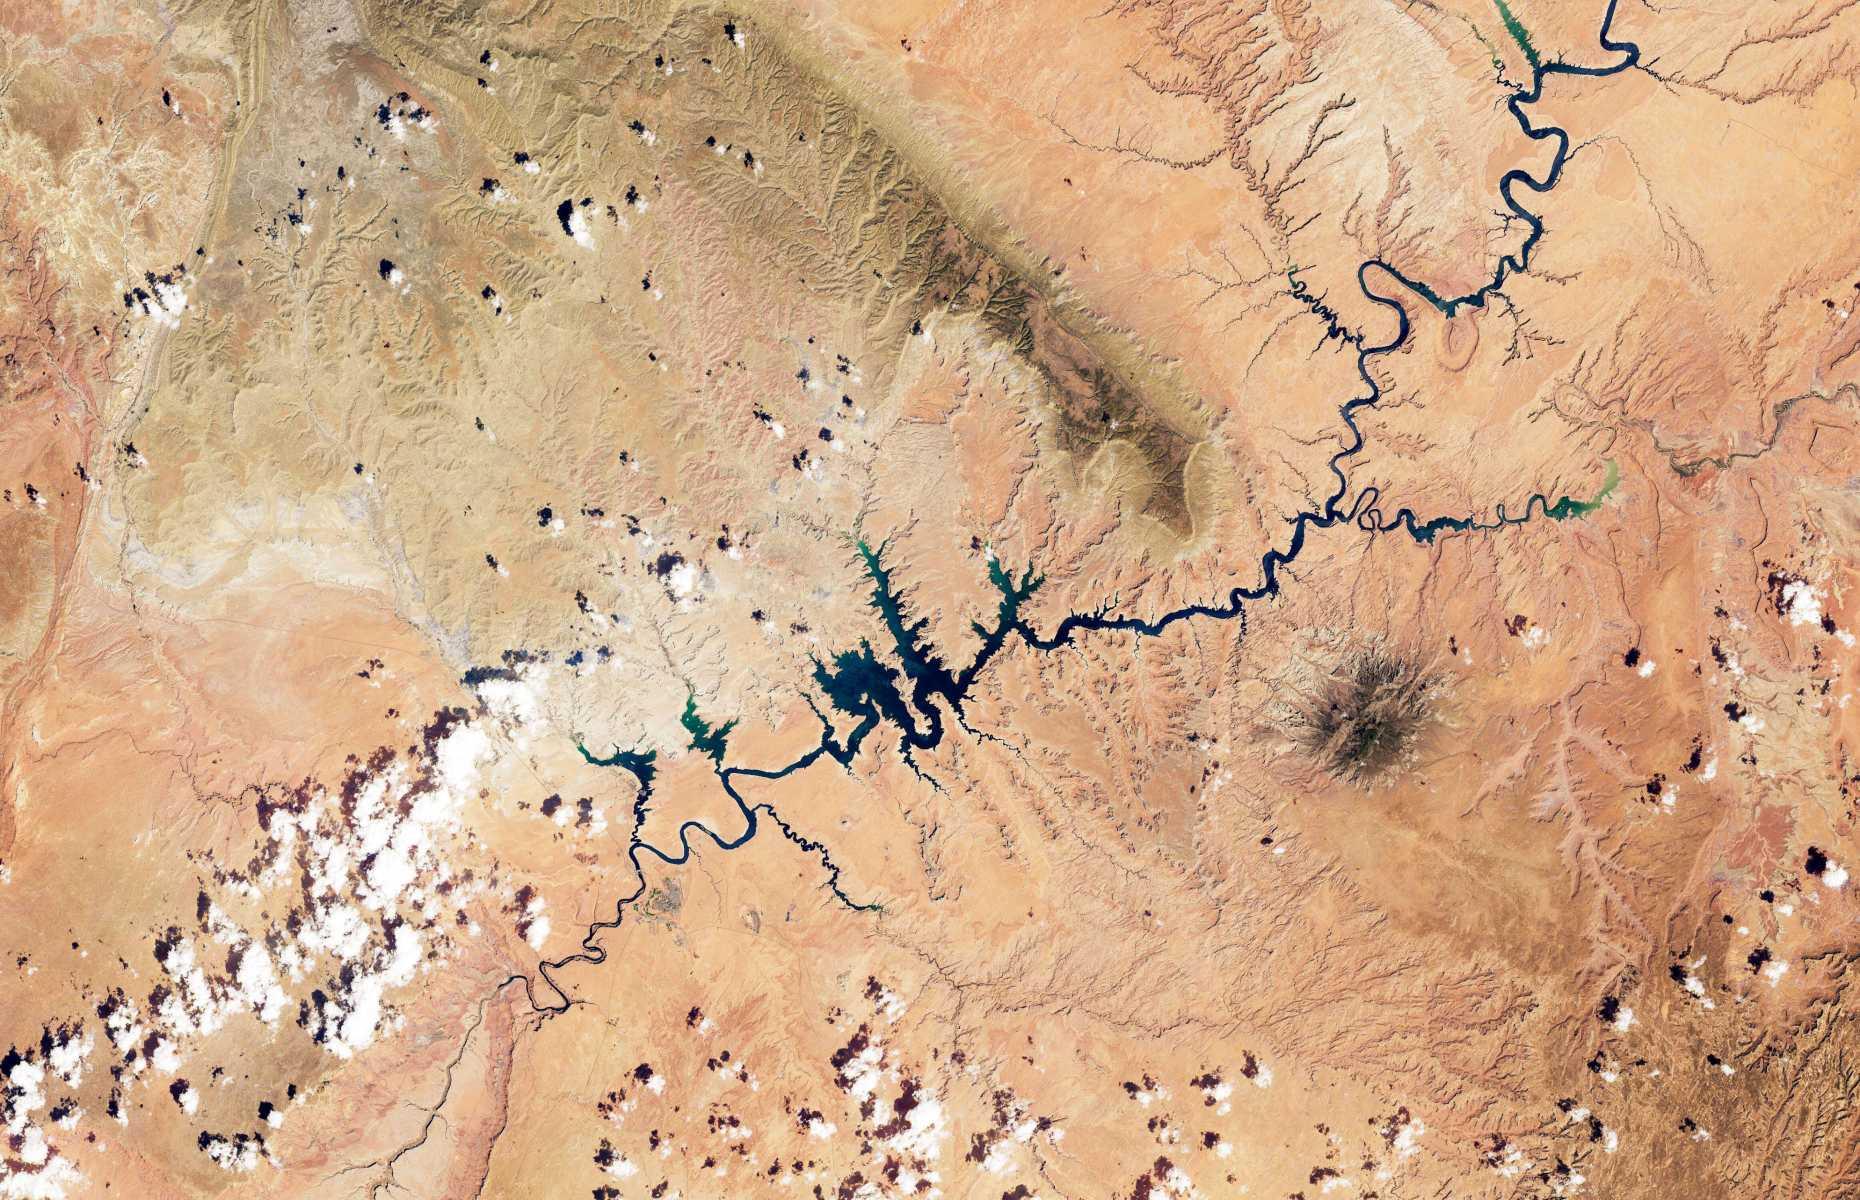 <p>In the <em>America’s Most Endangered Rivers</em> report of 2023, the Colorado River came out on top for the second consecutive year. Impacted by a damaging combination of poor water management, over-exploitation and climate change, the river is drying up at its banks and drastically thinning out. Lake Mead has been shrinking since 2000 and even more rapidly so since 2020, while Lake Powell (pictured) dropped to historically low levels in February 2023. According to <em>The Guardian</em>, the Colorado River has lost 10 trillion gallons of water since the turn of the millennium, due to rising global temperatures exacerbated by the climate emergency.</p>